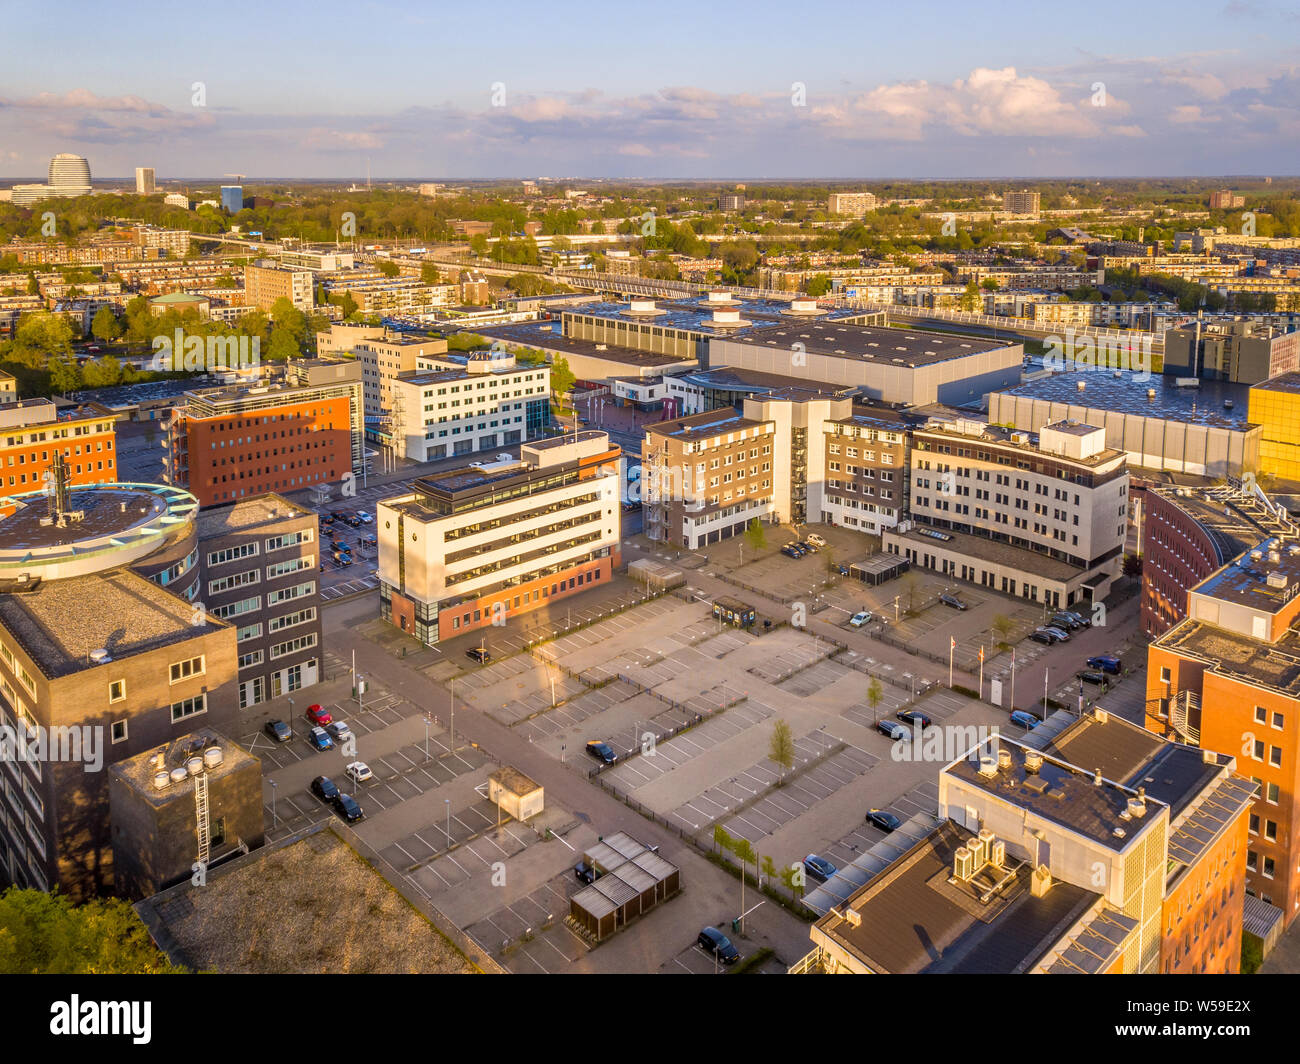 Commercial area in the Netherlands with office and bussiness building and parking lots Stock Photo